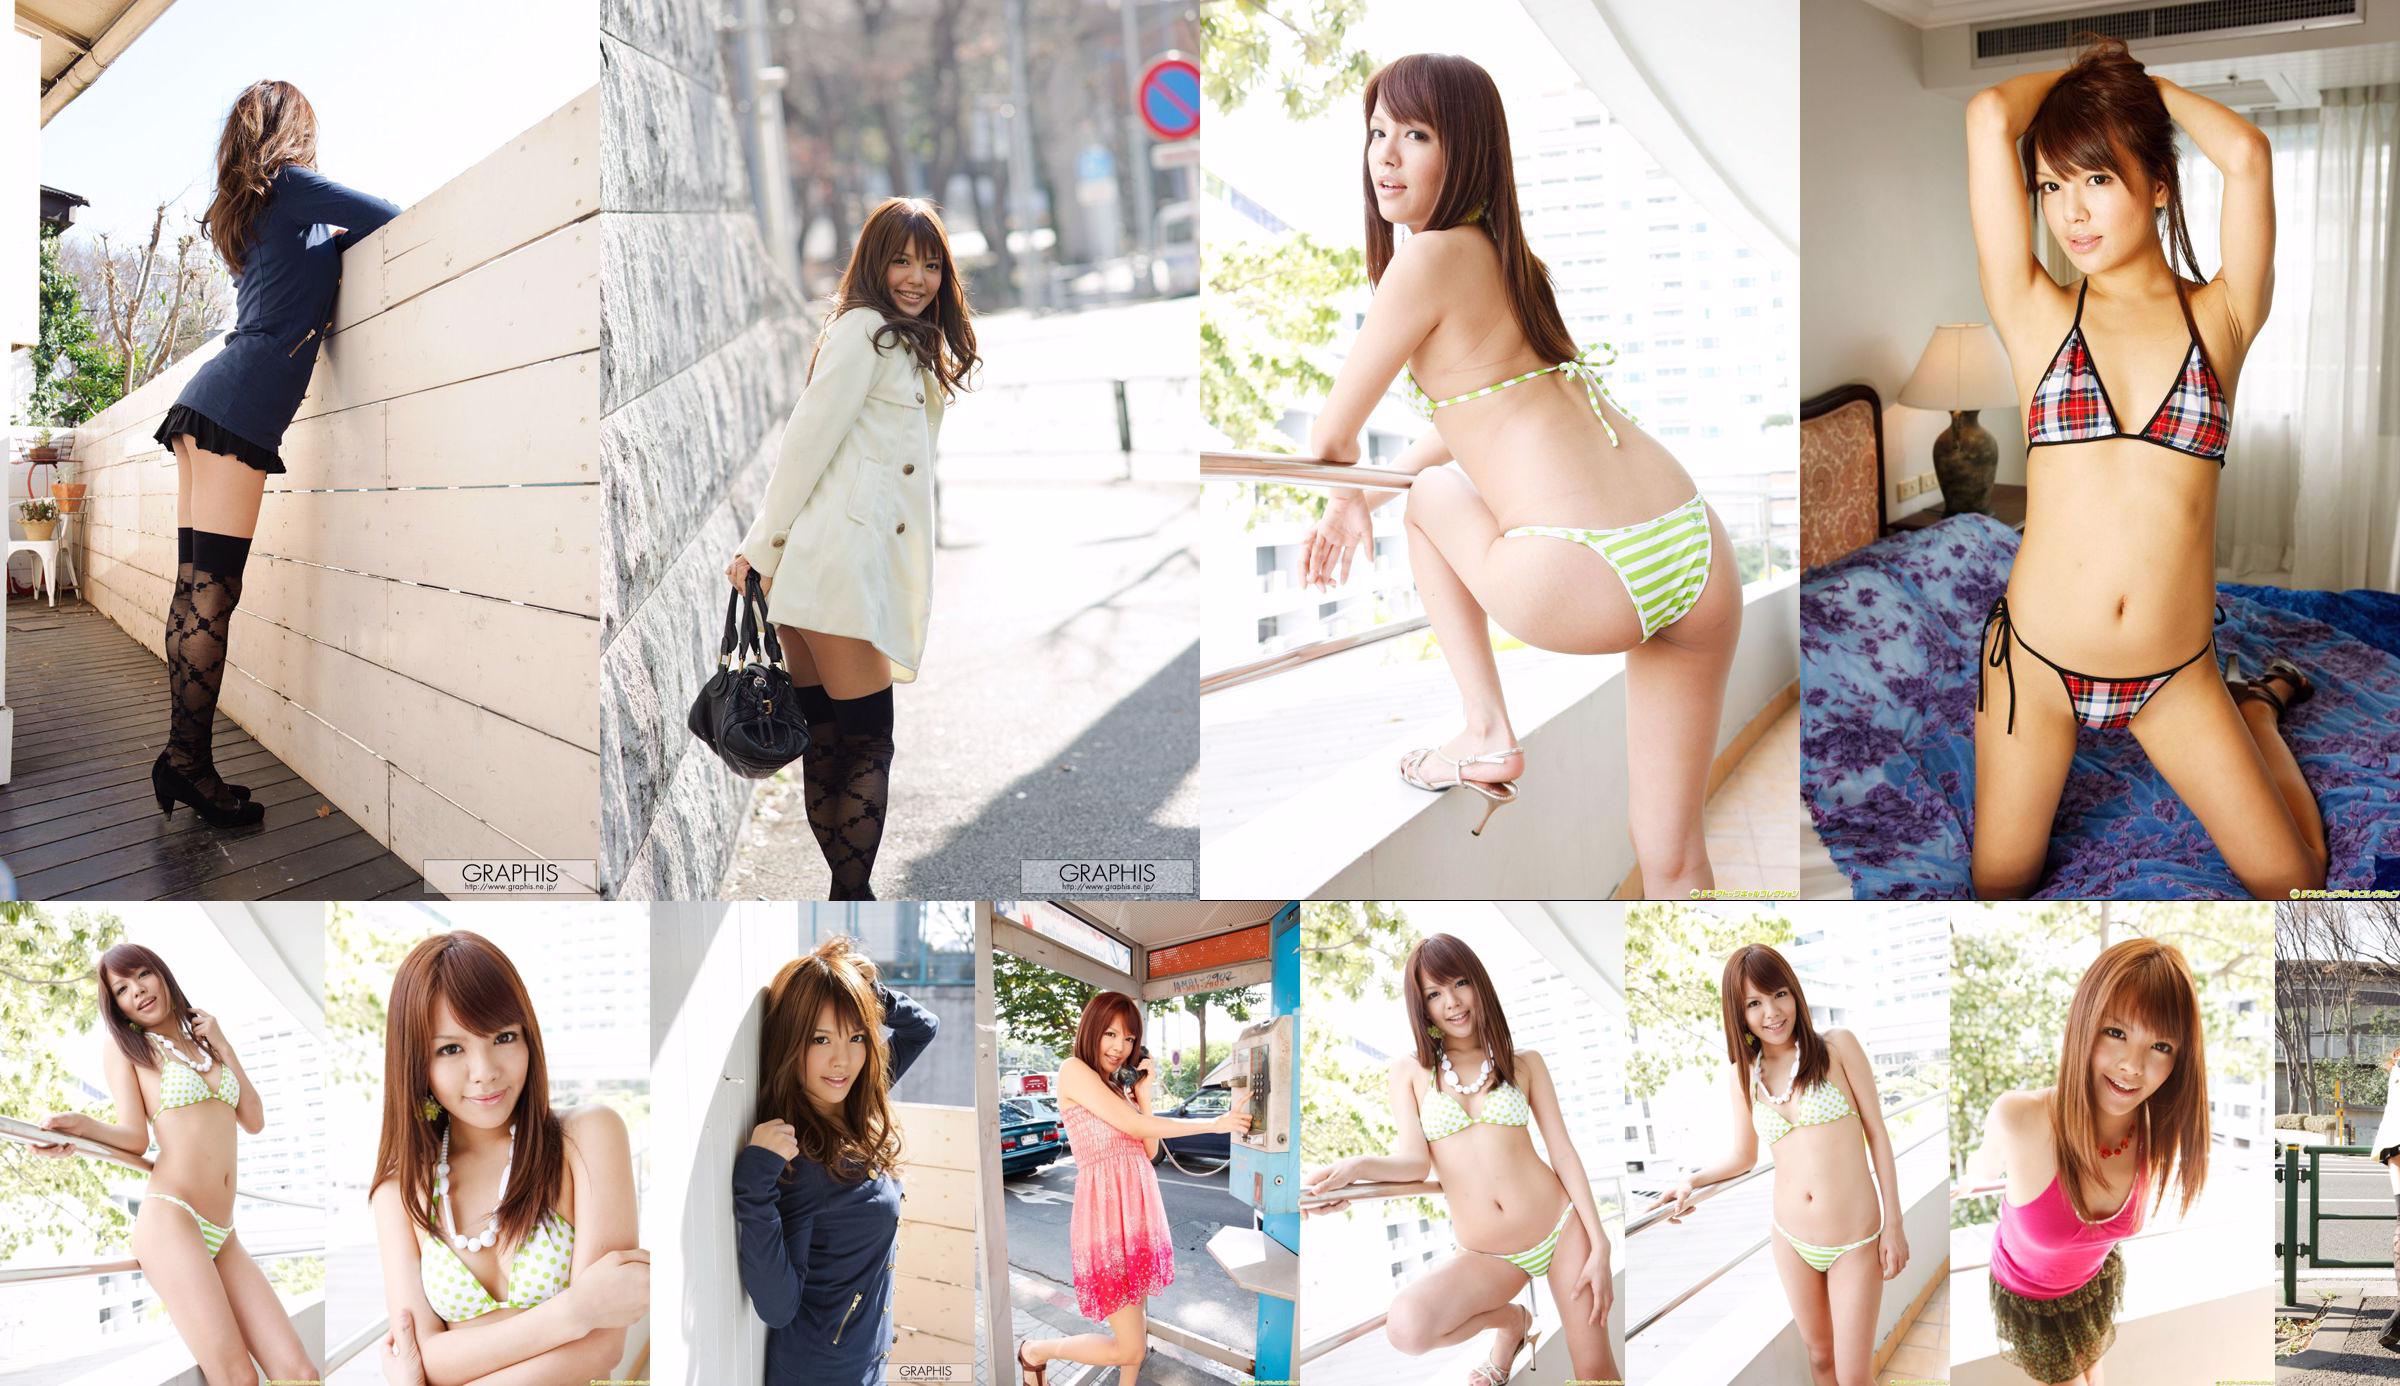 Coco Aiba Coco Aiba [Graphis] First Gravure First off daughter No.6d68c8 Page 1